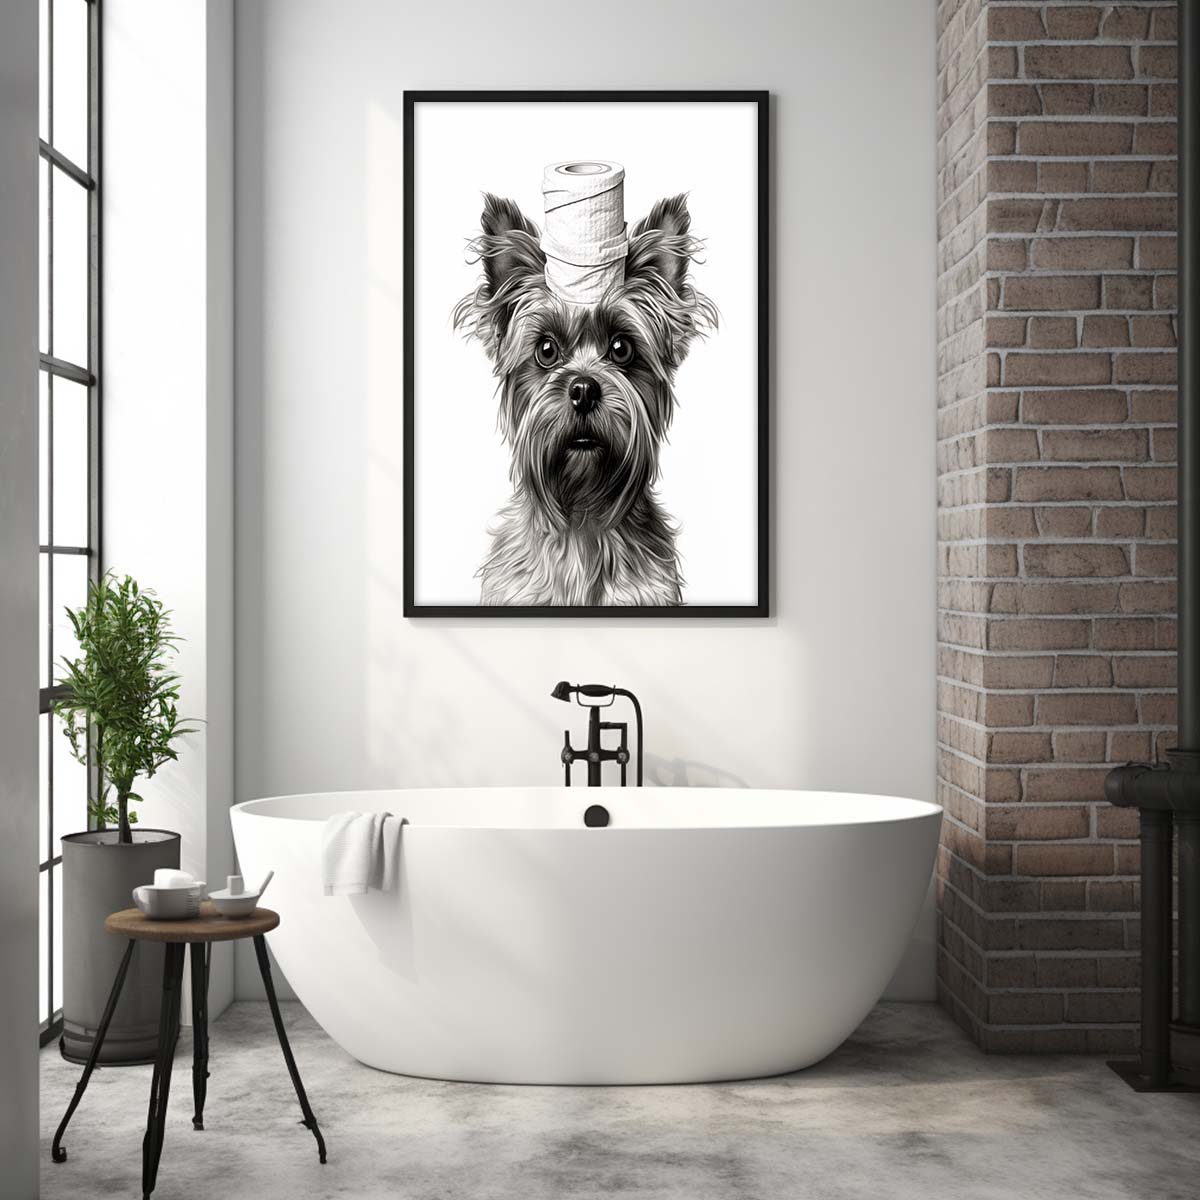 Yorkshire Terrier 01 With Toilet Paper, Canvas Or Poster, Funny Dog Art, Bathroom Wall Decor, Home Decor, Bathroom Wall Art, Dog Wall Decor, Animal Decor, Pet Gift, Pet Illustration, Digital Download